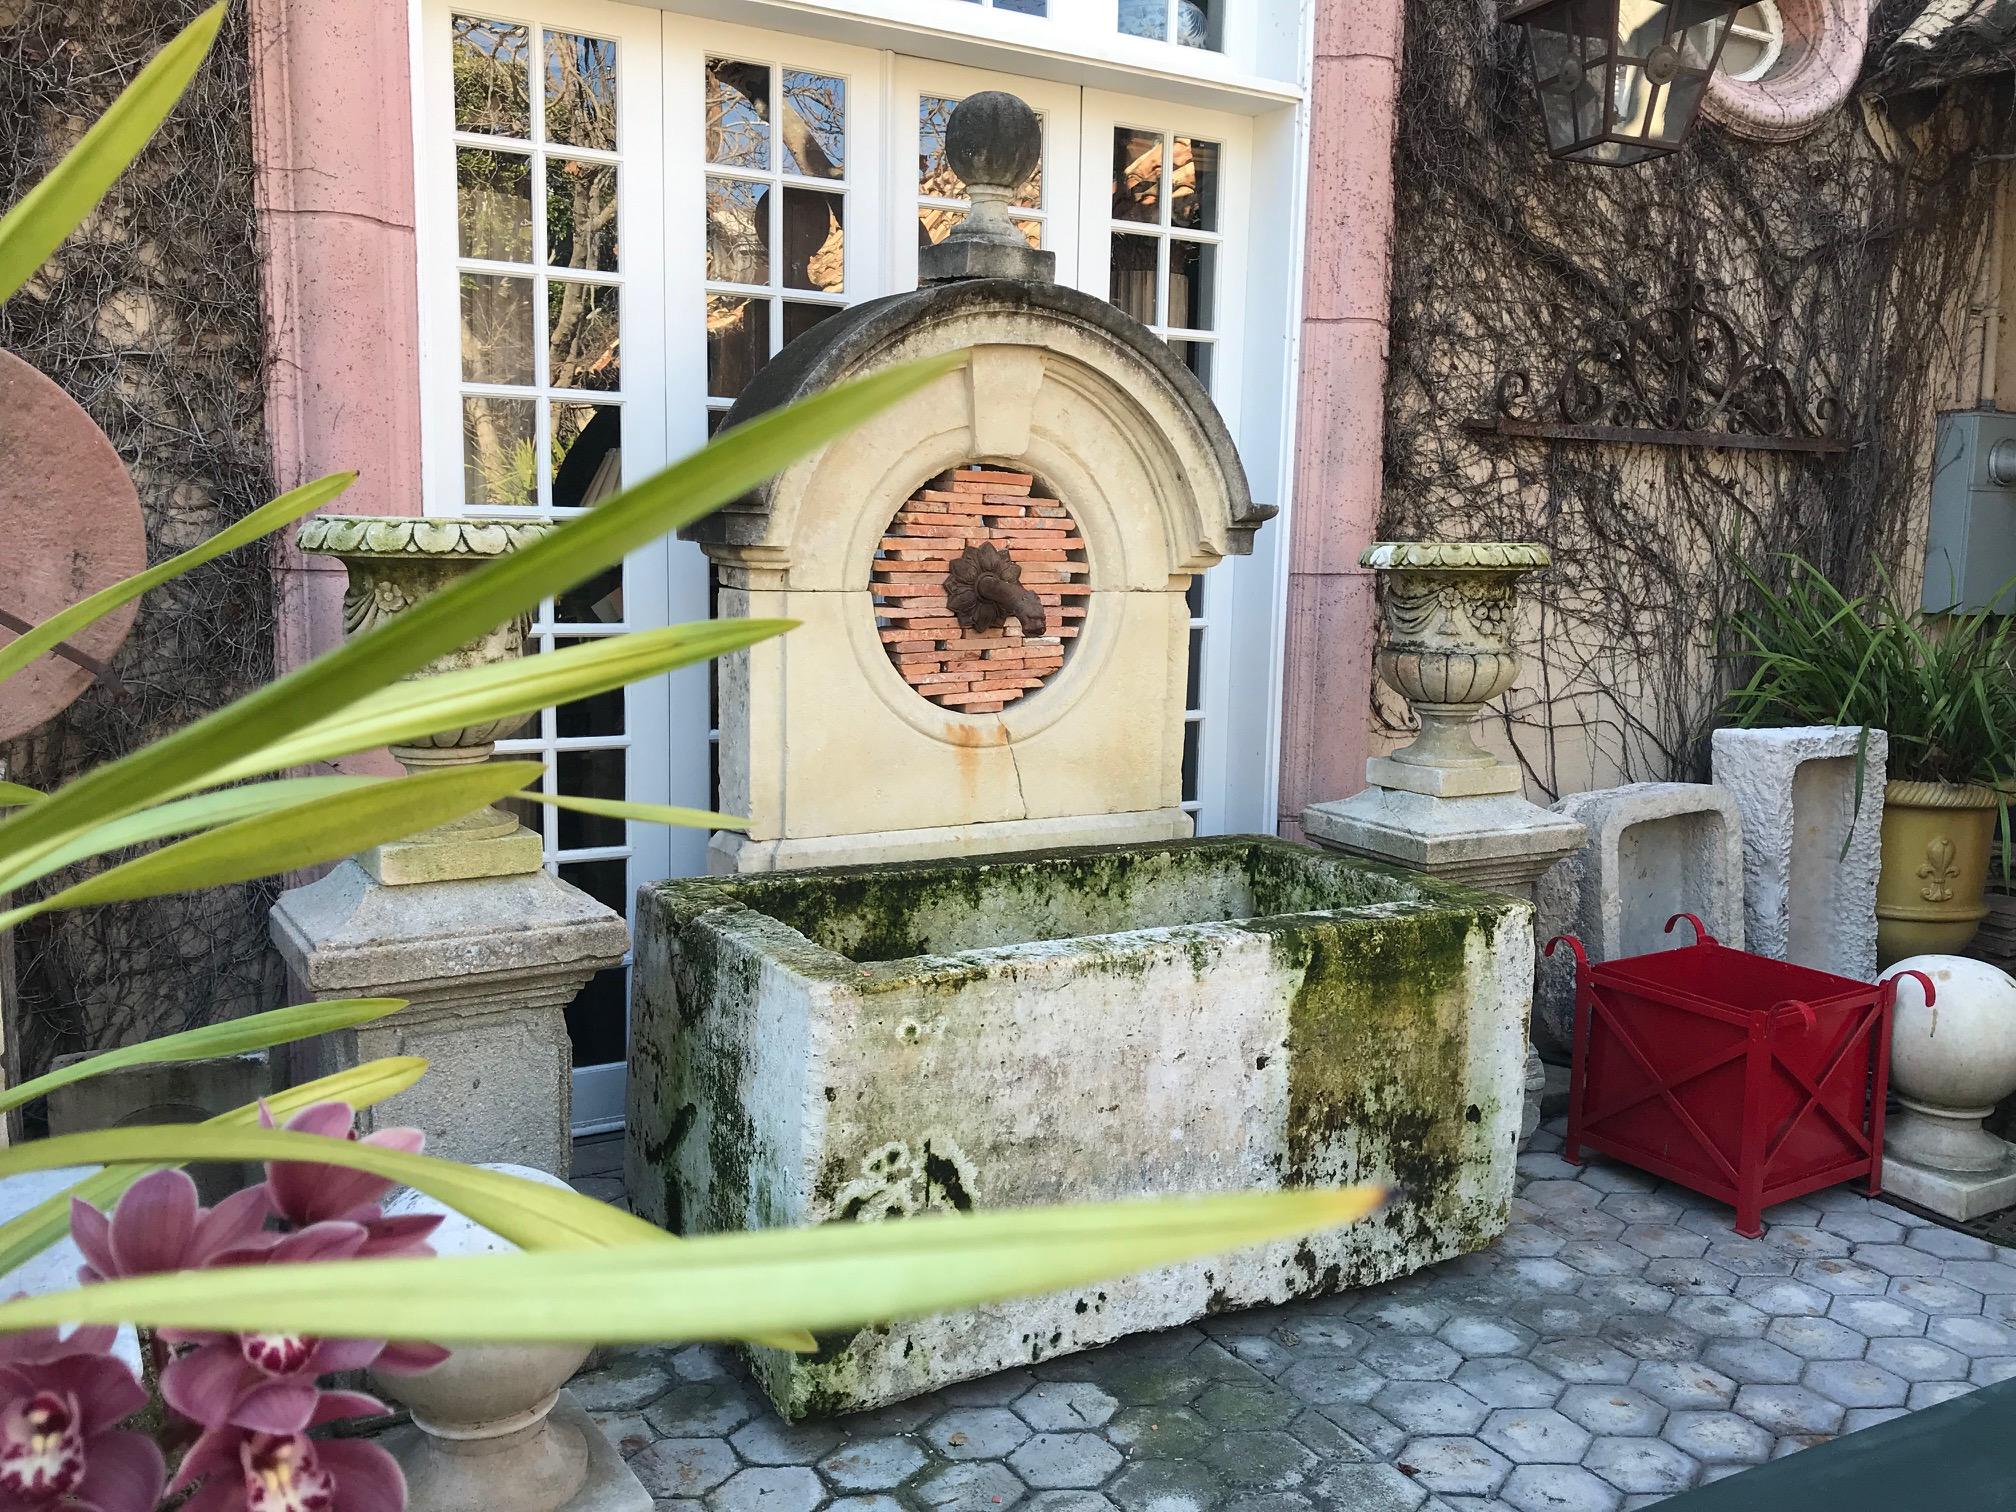 This exquisite water fountain is created of beautifully carved old elements. A rare late 17th-early 18th century stone window Oeil-de-boeuf from an old Chateau in Dordogne.
It's crowned with a handsome stone sphere finial. The mythical dolphin spout